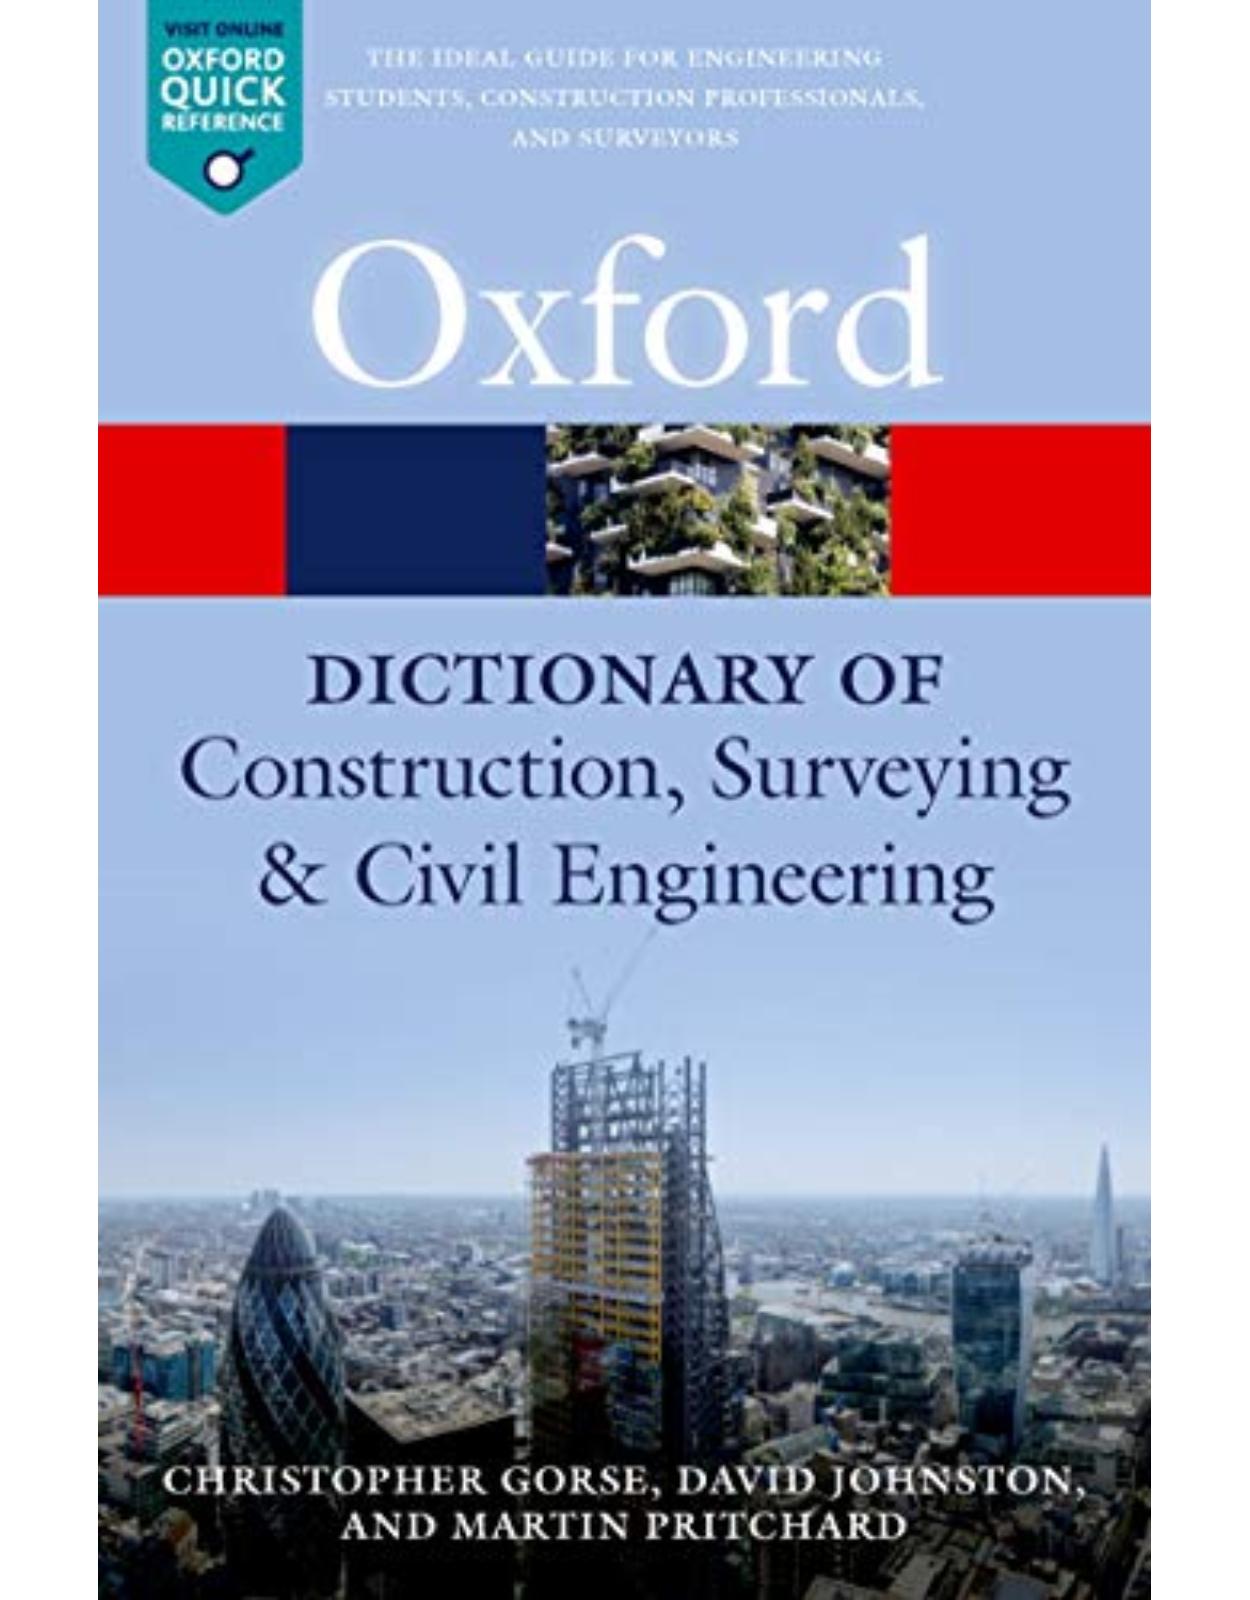 A Dictionary of Construction, Surveying, and Civil Engineering